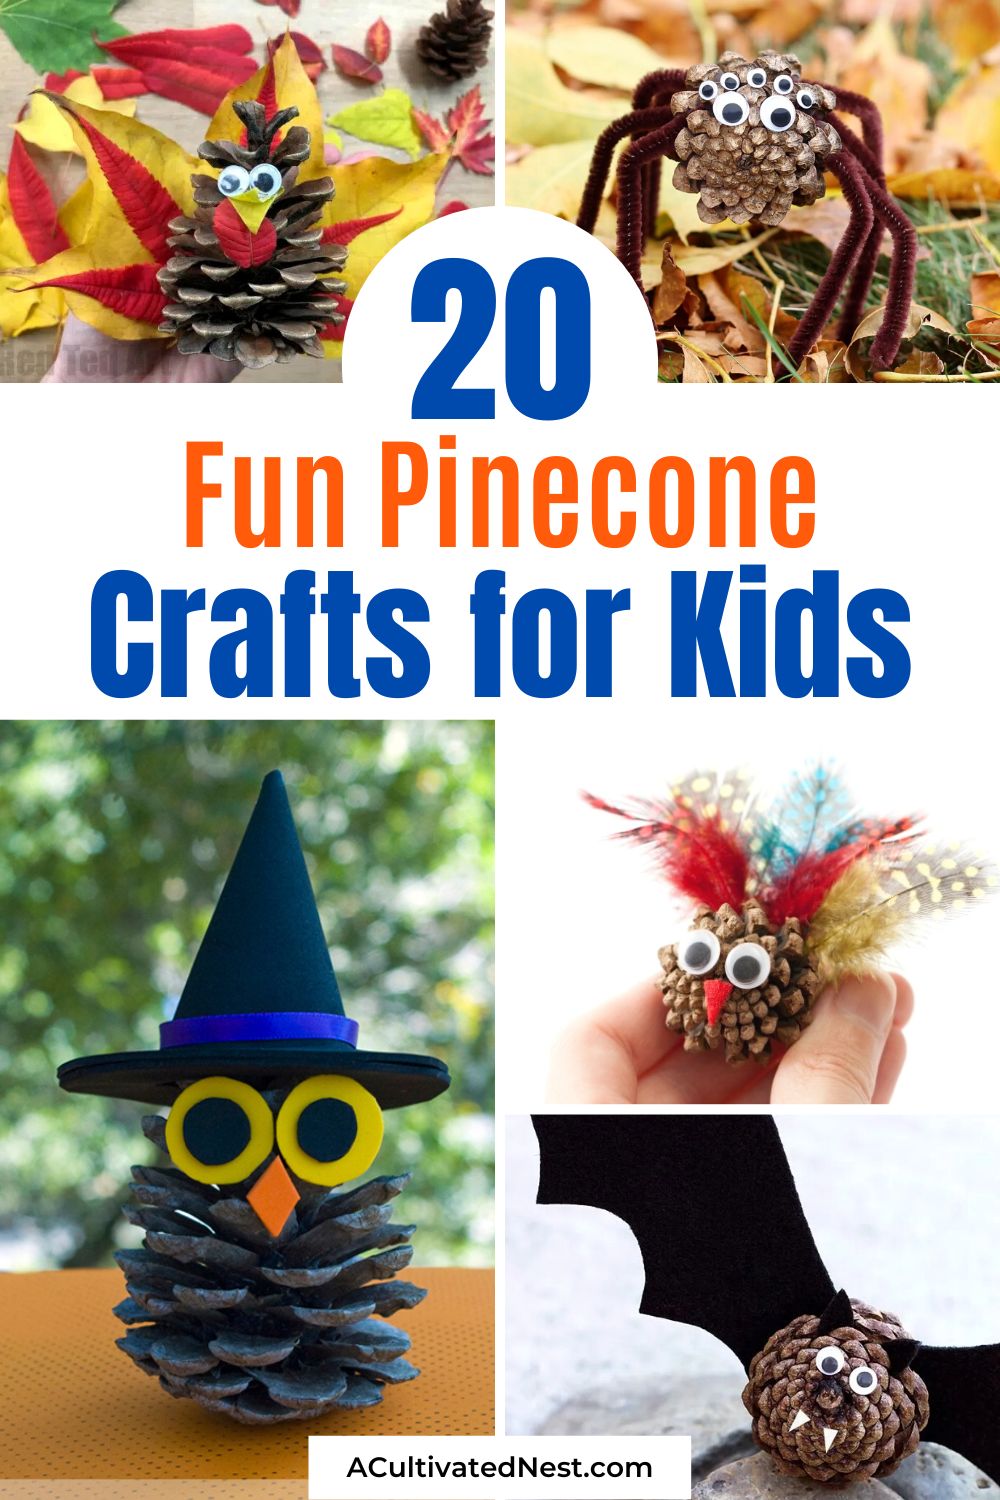 20 Fun Pinecone Crafts for Kids-Want a fun, easy, and inexpensive fall kids craft? Then you have to check out these fun pinecone crafts for kids! There are so many cute autumn crafts they can make with pinecones! | #craftsForKids #fallDIYs #kidsCrafts #pinecones #ACultivatedNest